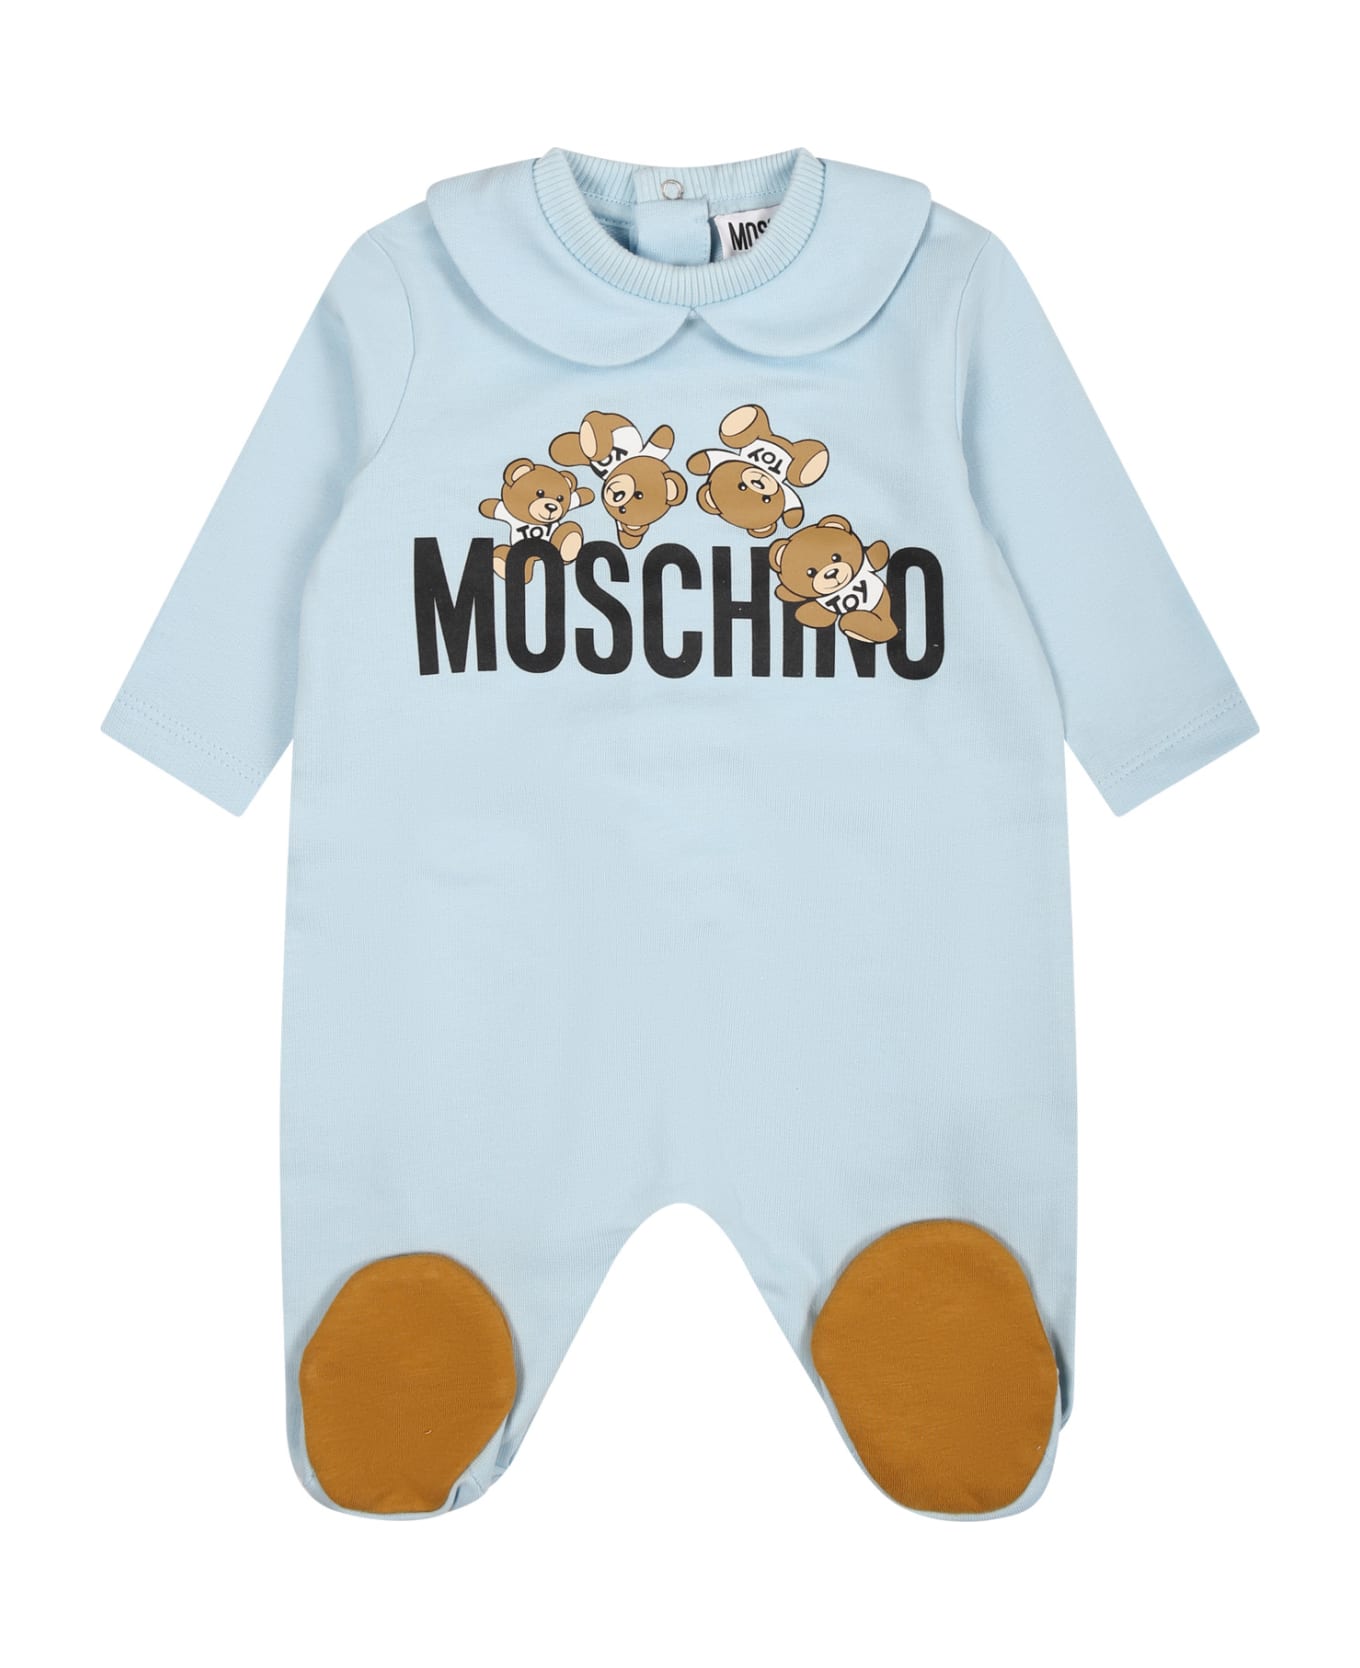 Moschino Light Blue Playsuit For Baby Boy With Logo And Teddy Bear - Light Blue